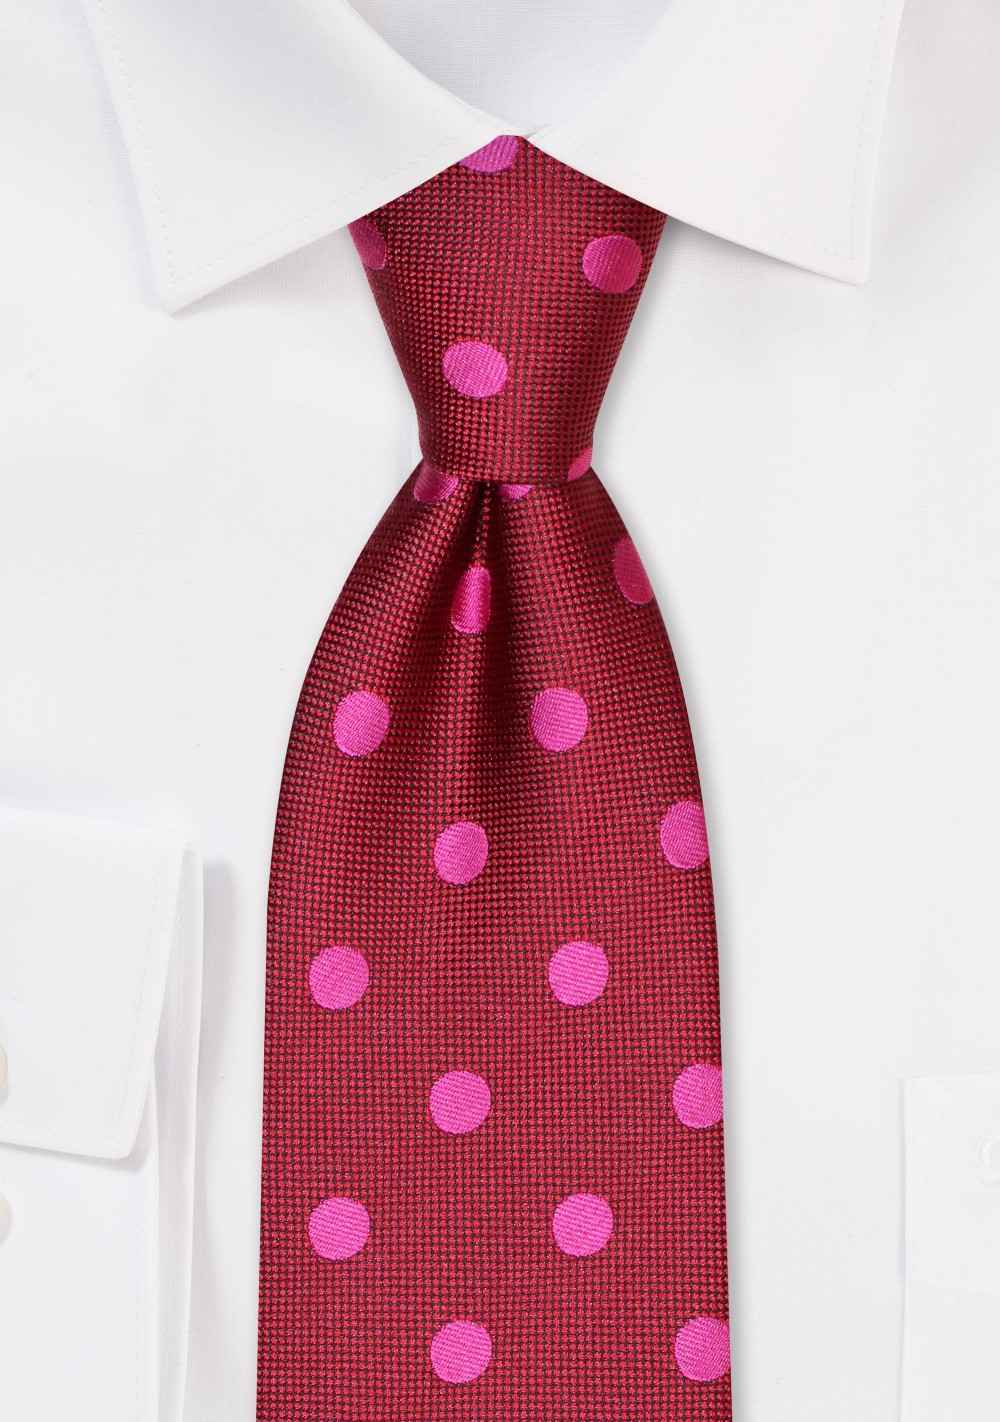 Extra Long Polka Dot Neckties, Cherry Red and Magenta Pink Polka Dot Tie  in XL Length